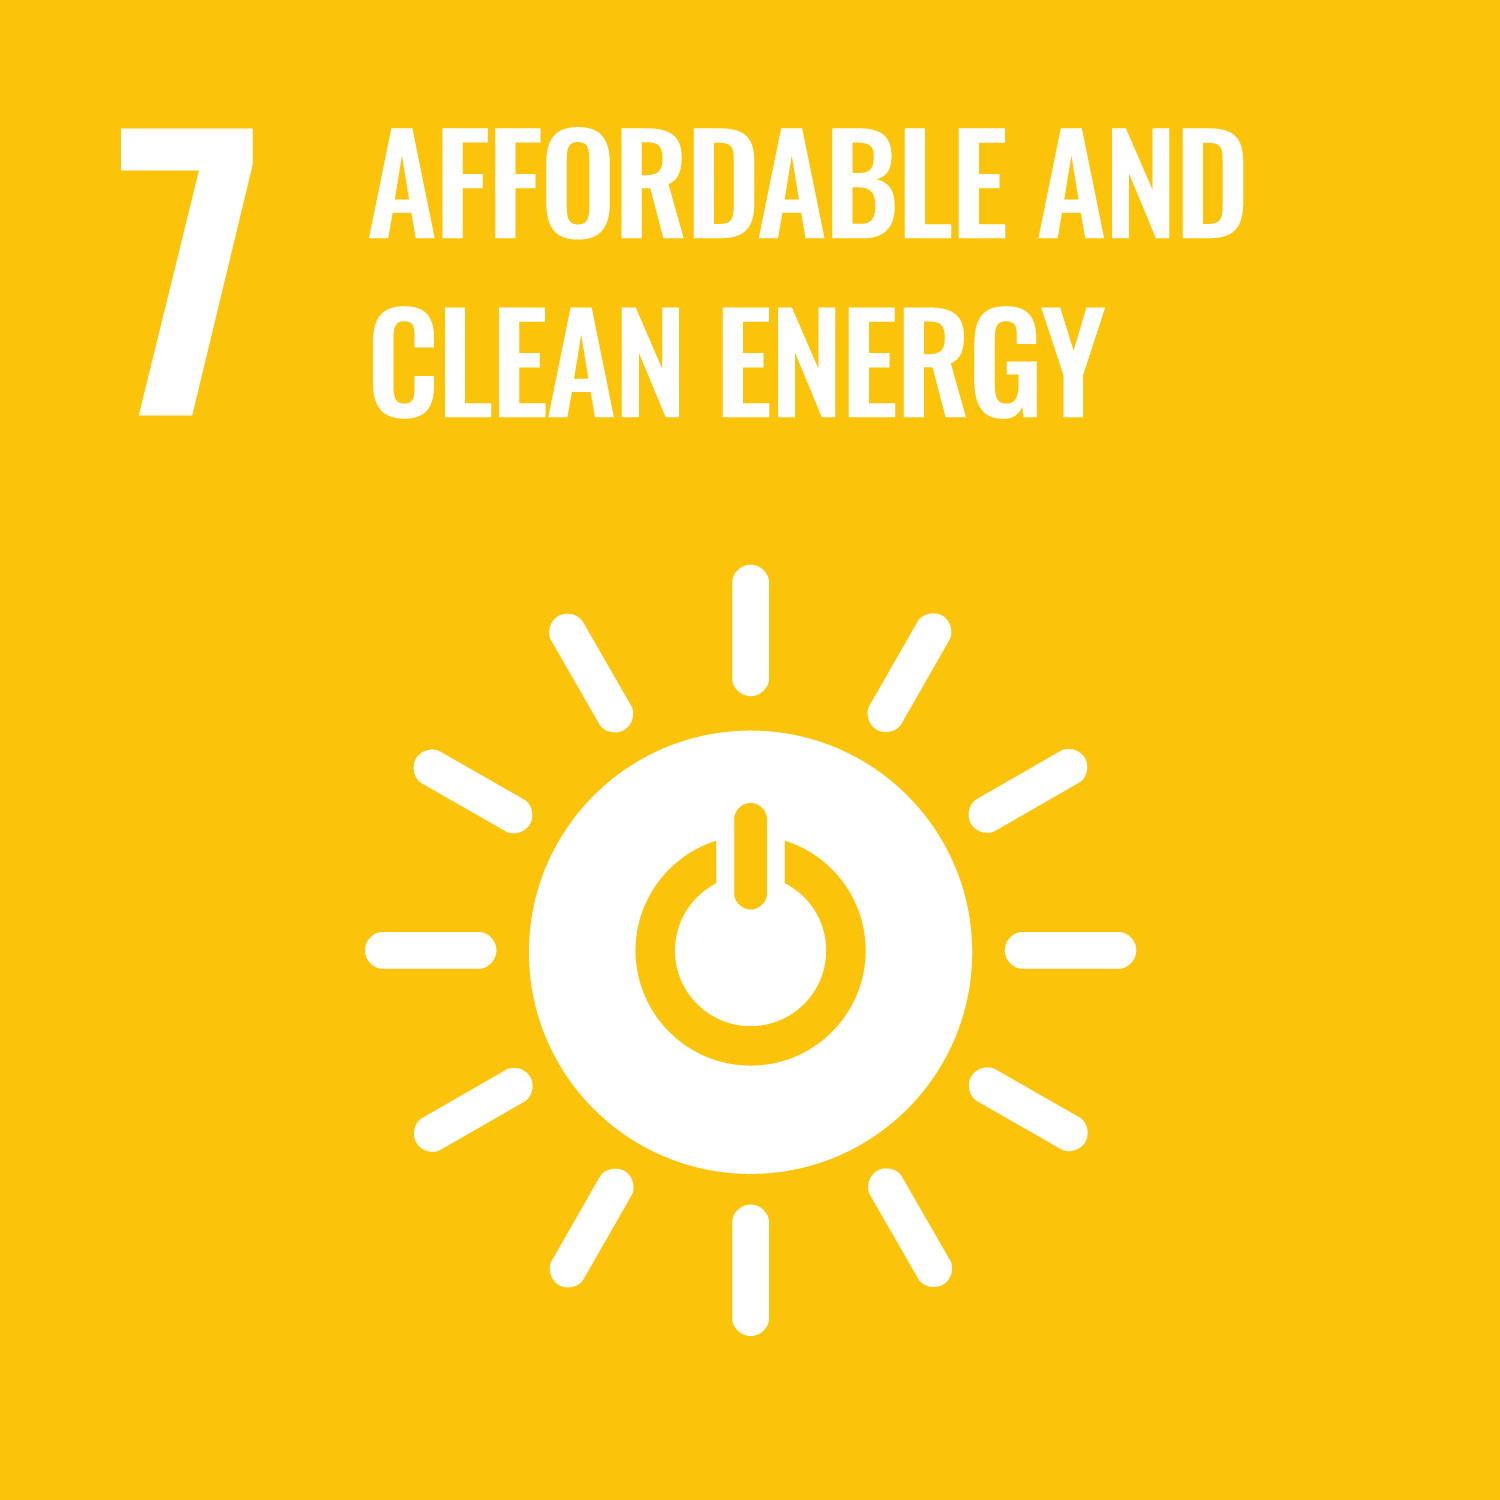 SDGs7.AFFORDABLE AND CLEAN ENERGY